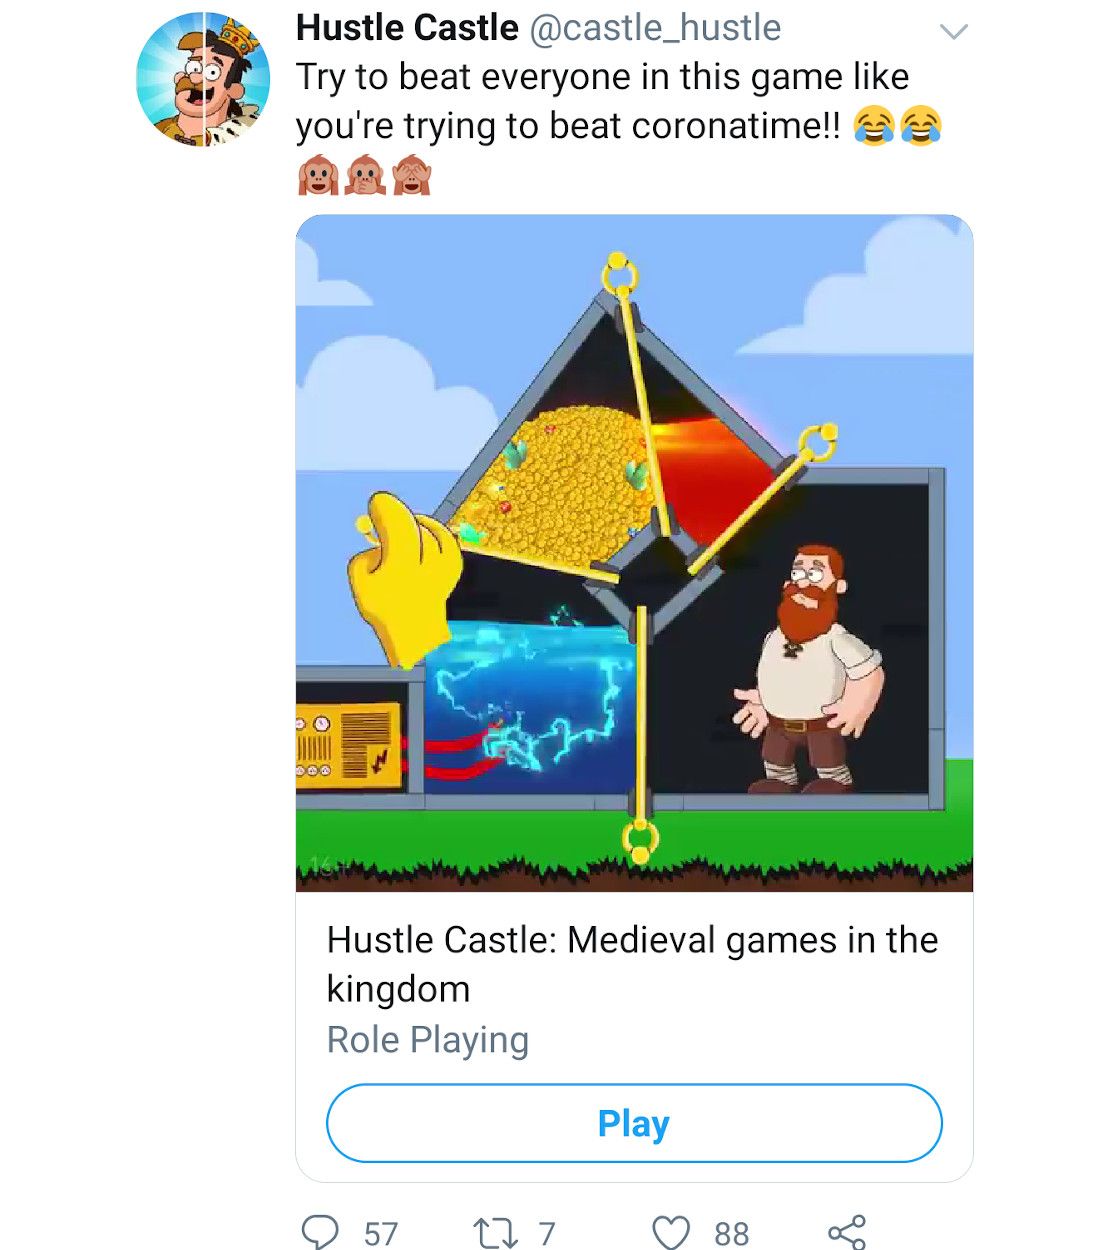 is there a game like the fake homescapes ad